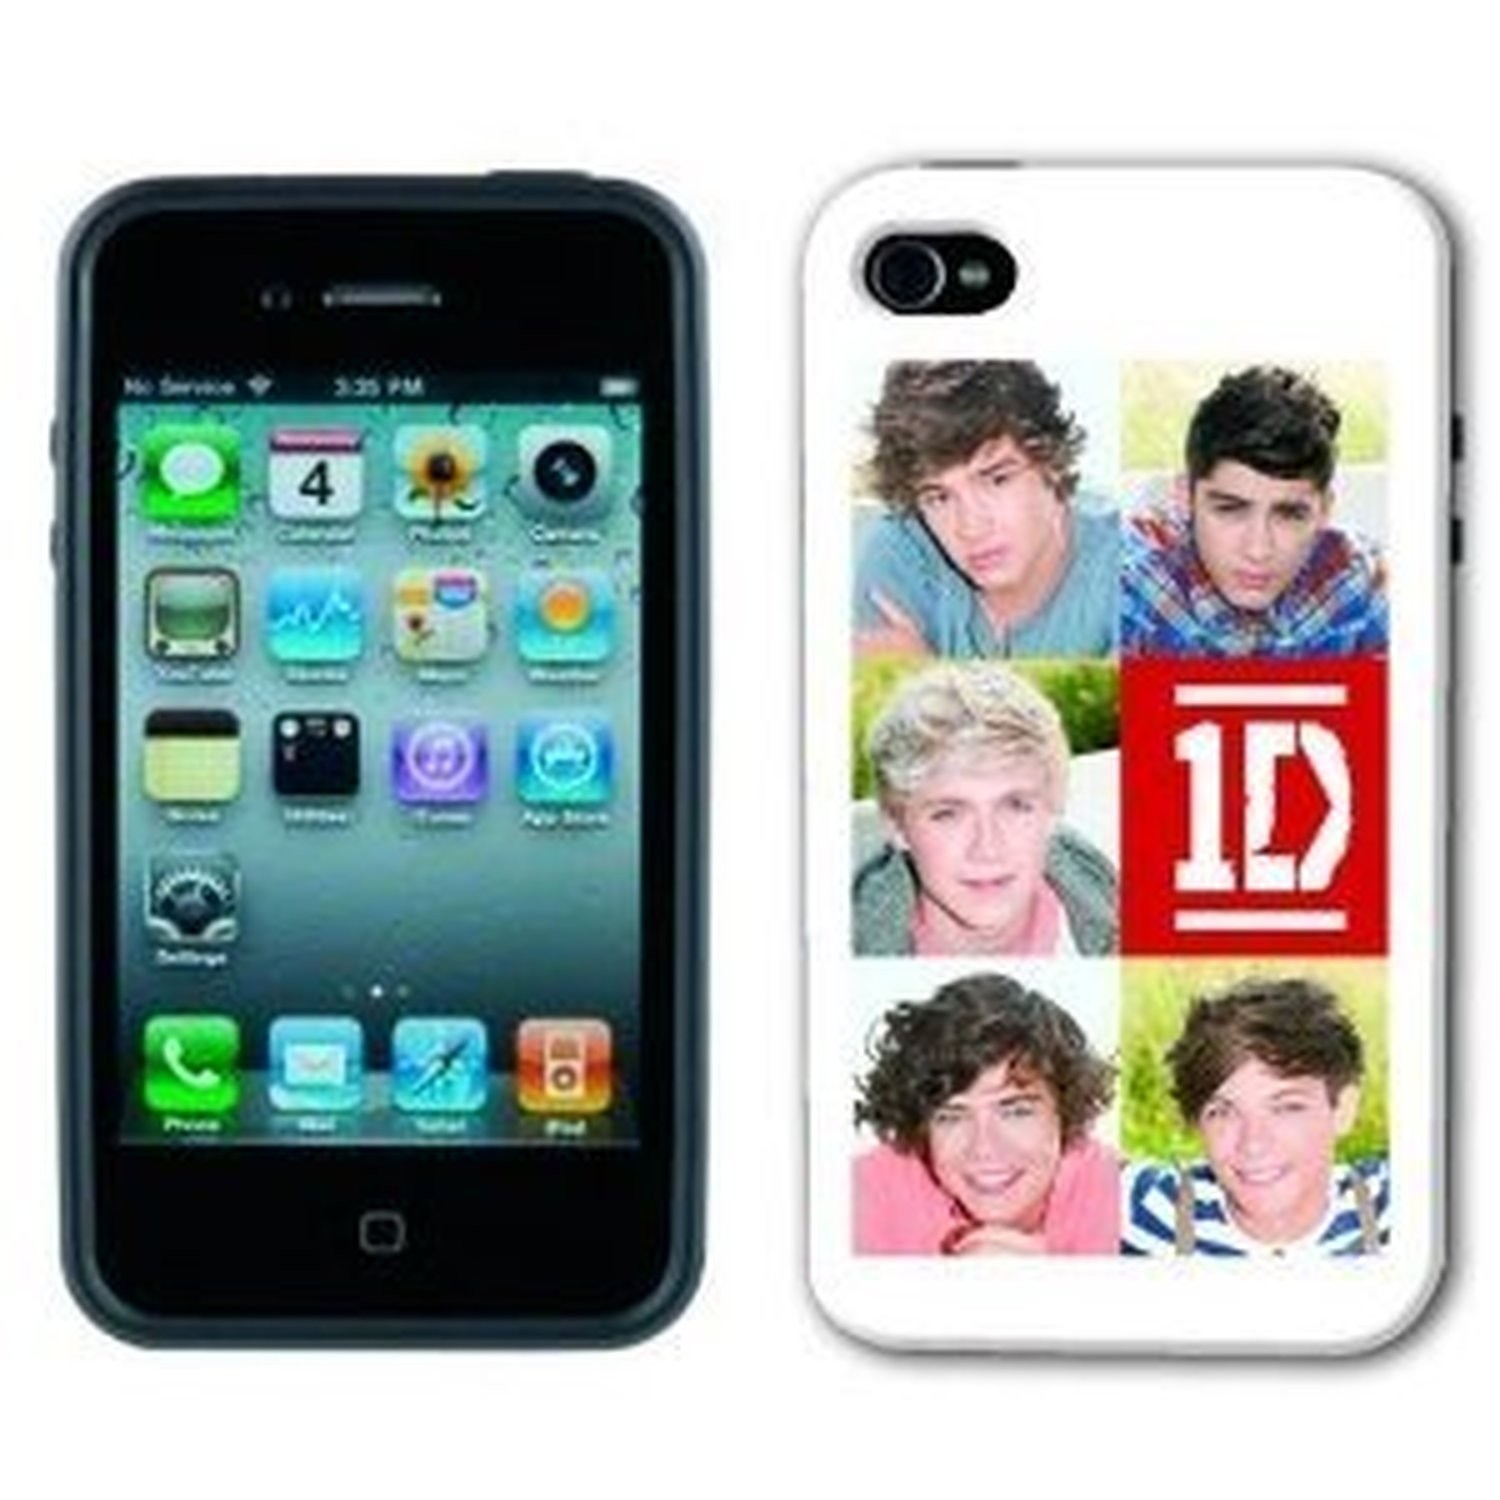 1D One Direction Harry Styles iPhone 4 4G 4GS White Cover Hard Case Official